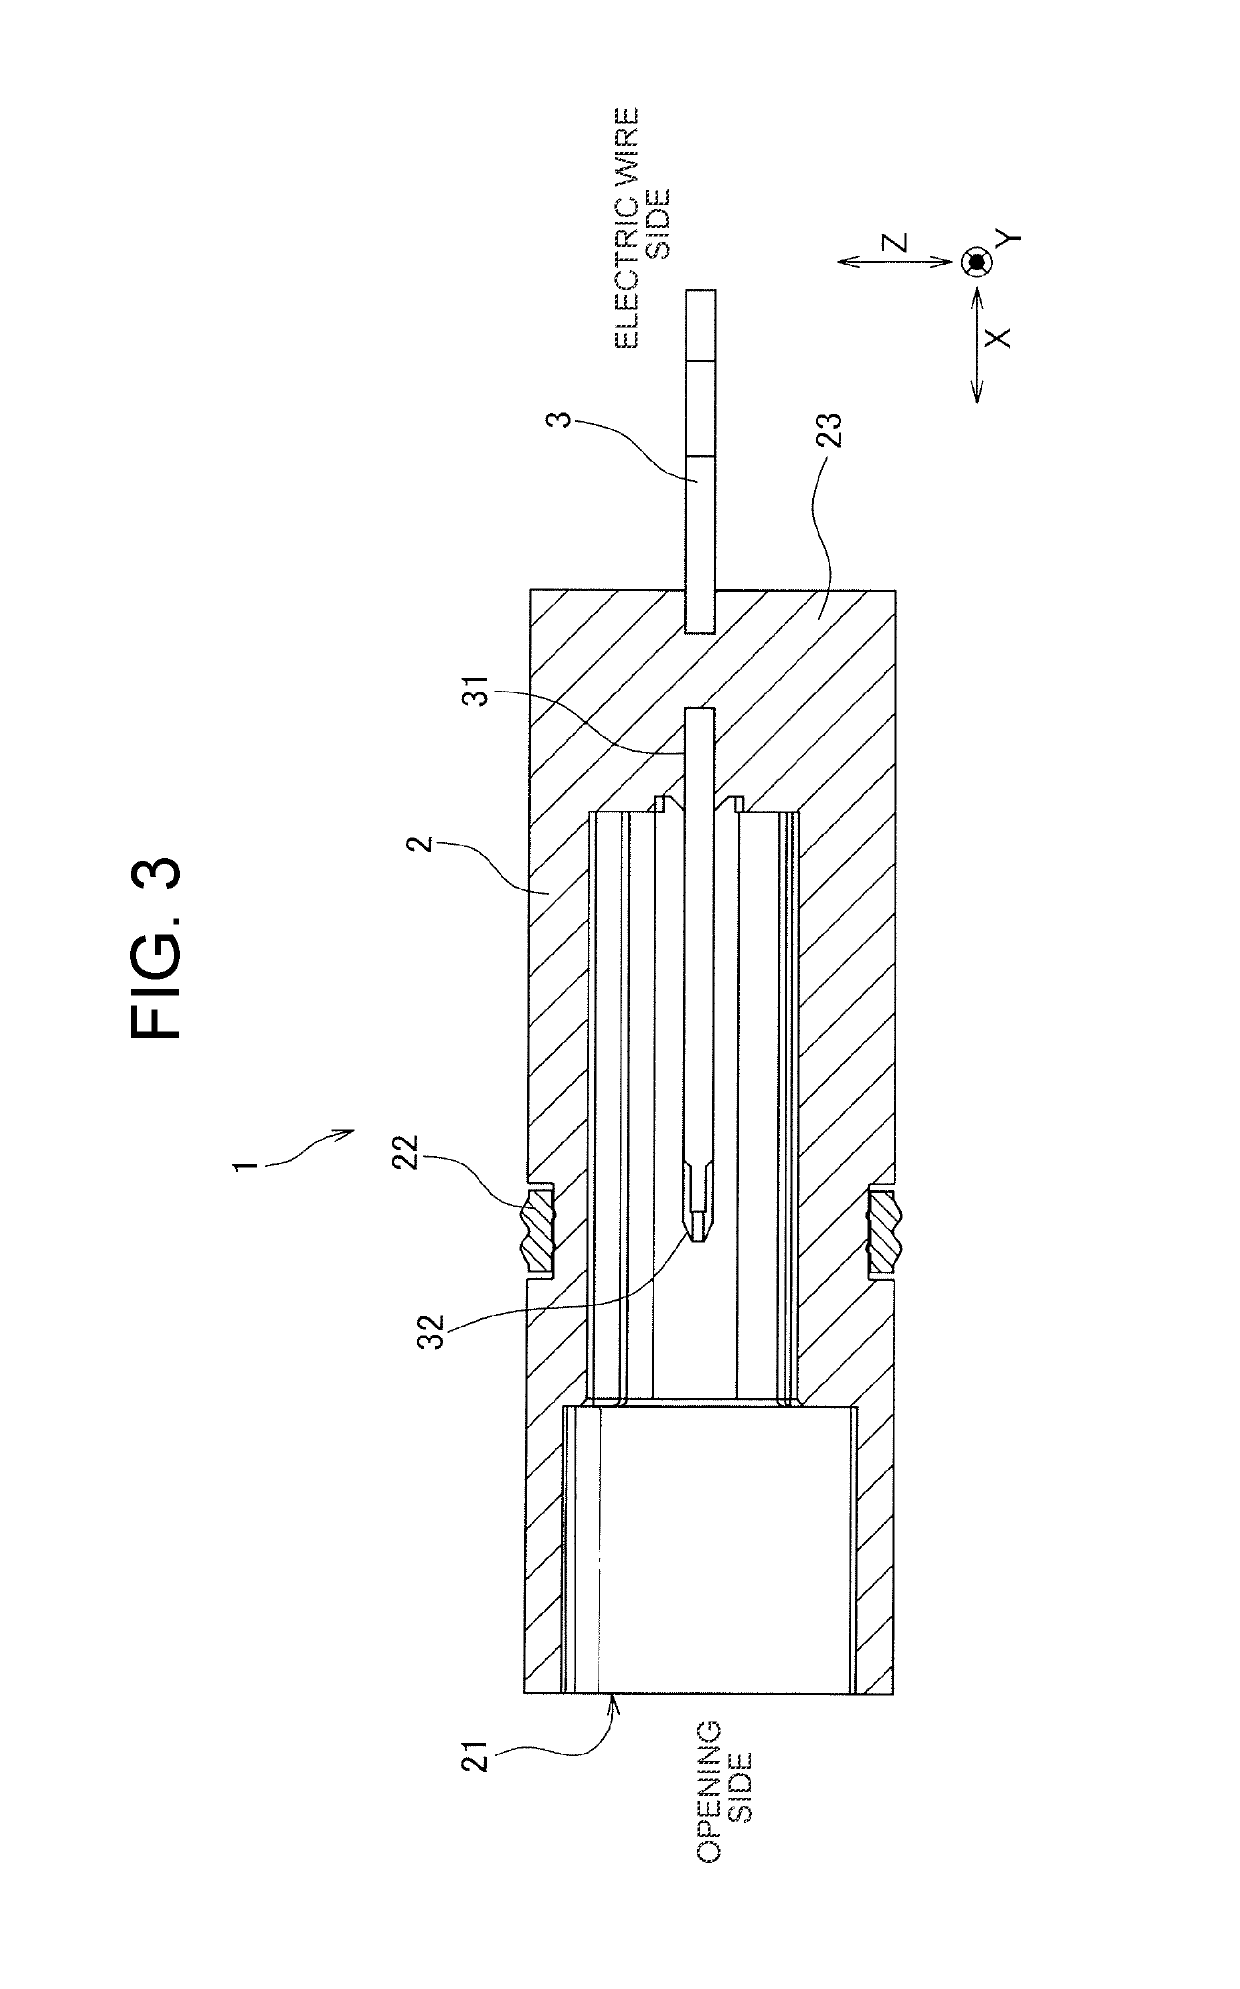 Connector having terminal with insulated tip and edges